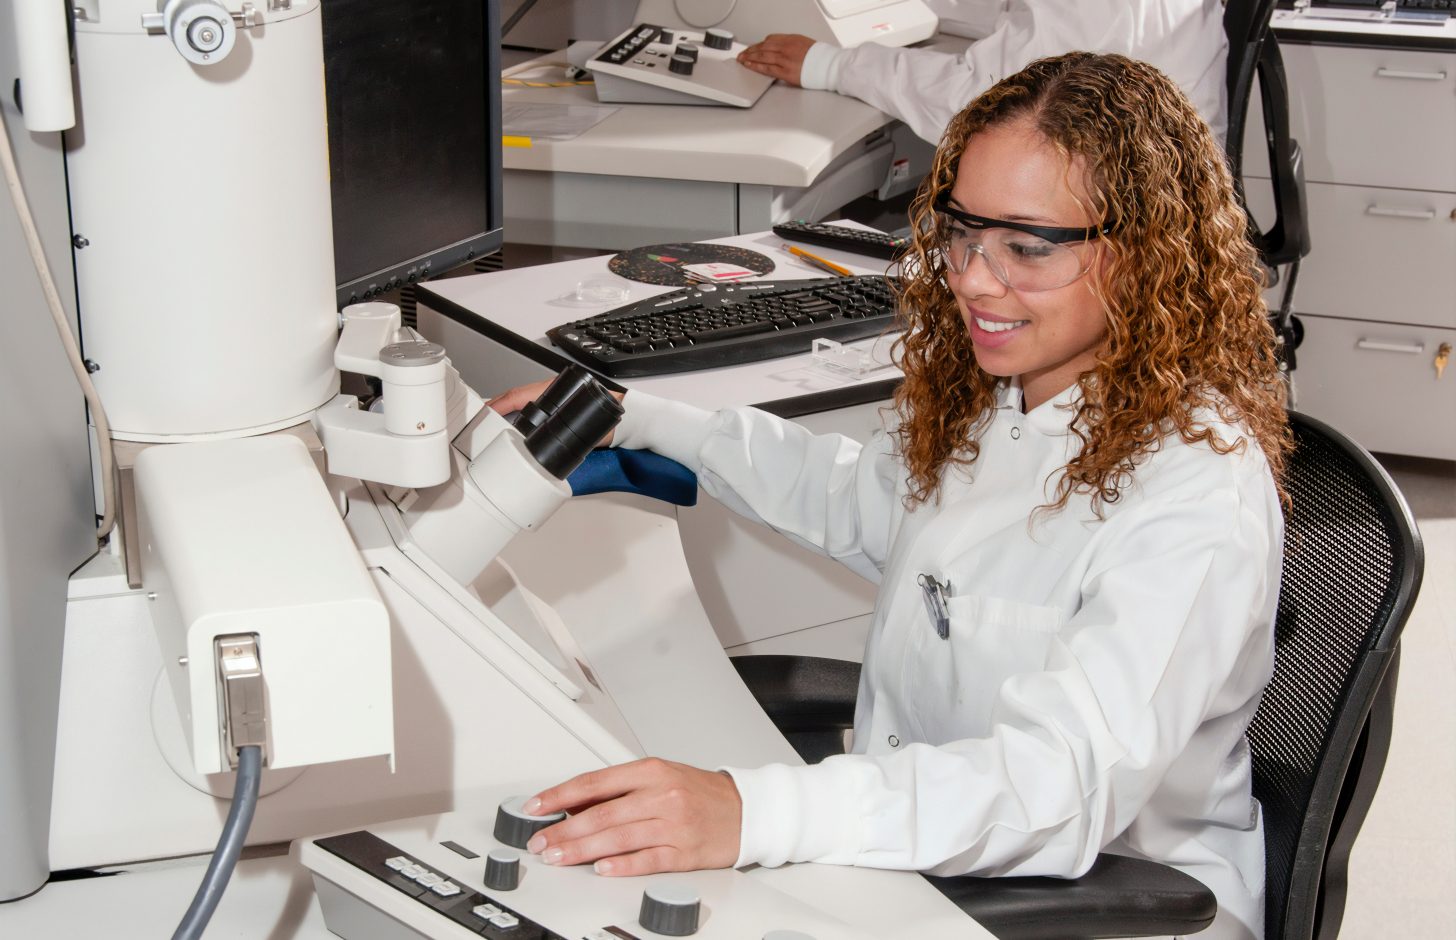 A young black woman in lab coat and goggles experiments on lab equipment